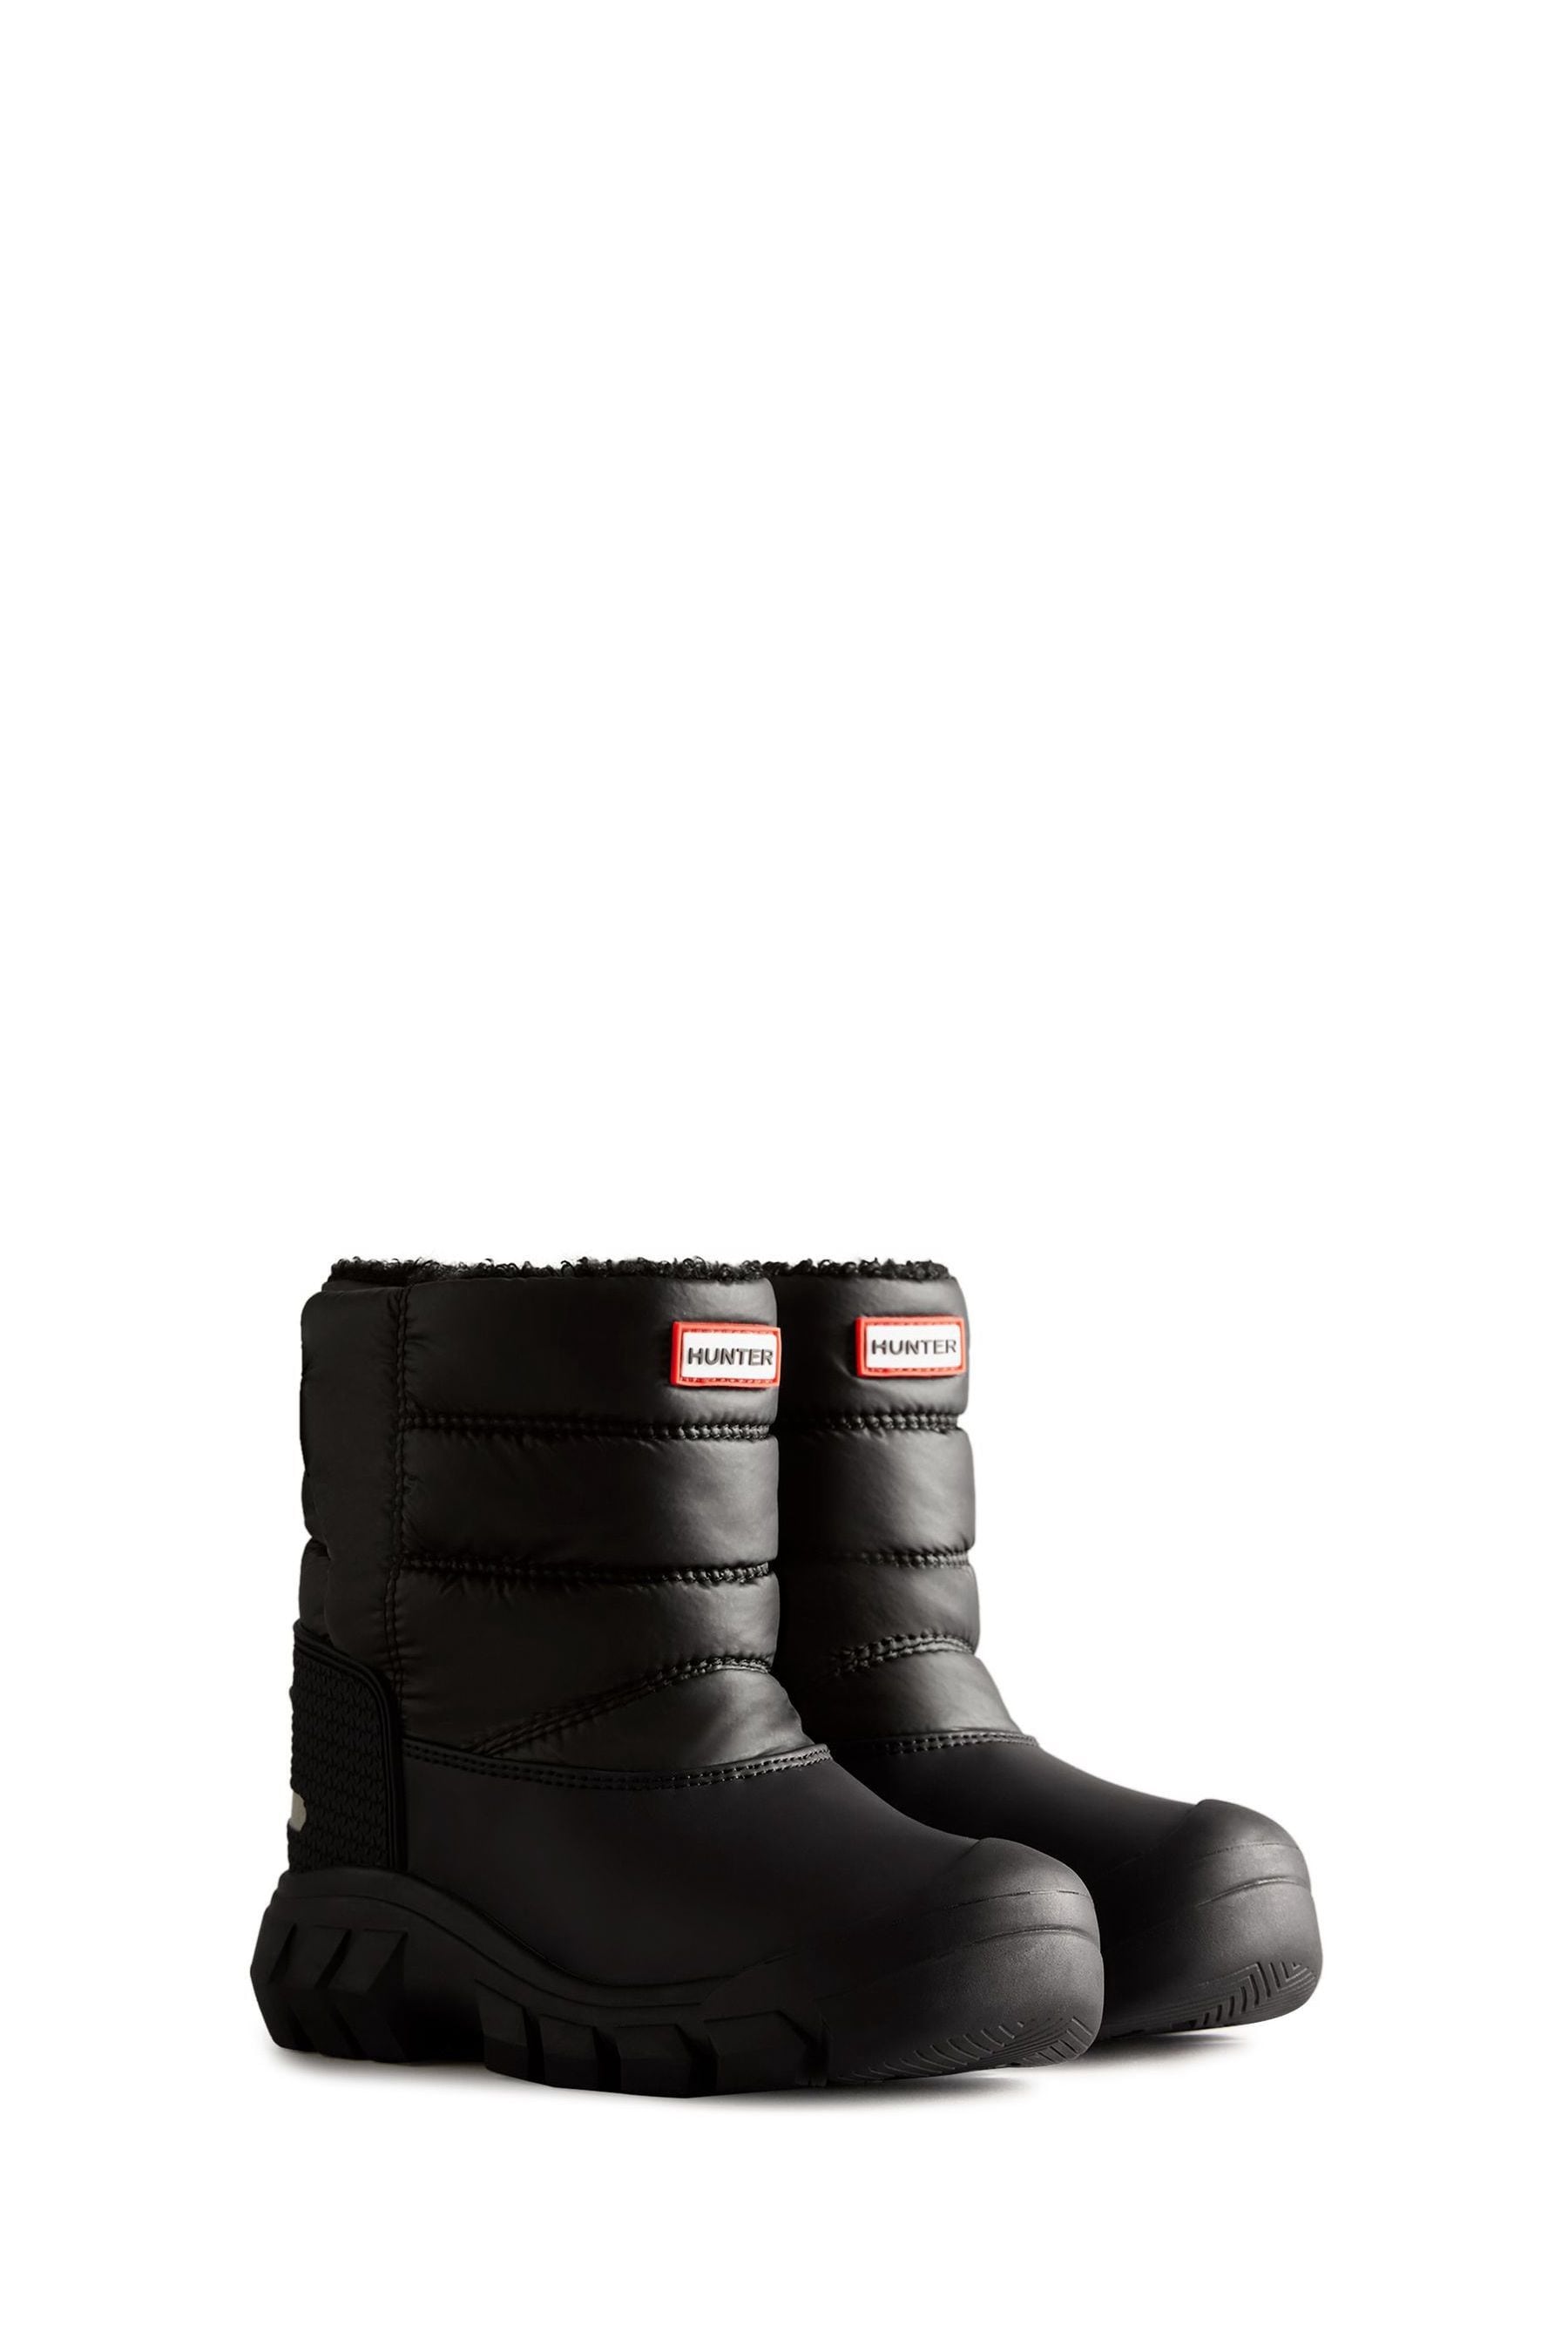 Buy Hunter Kids Black Intrepid Snow Boots from the Next UK online shop